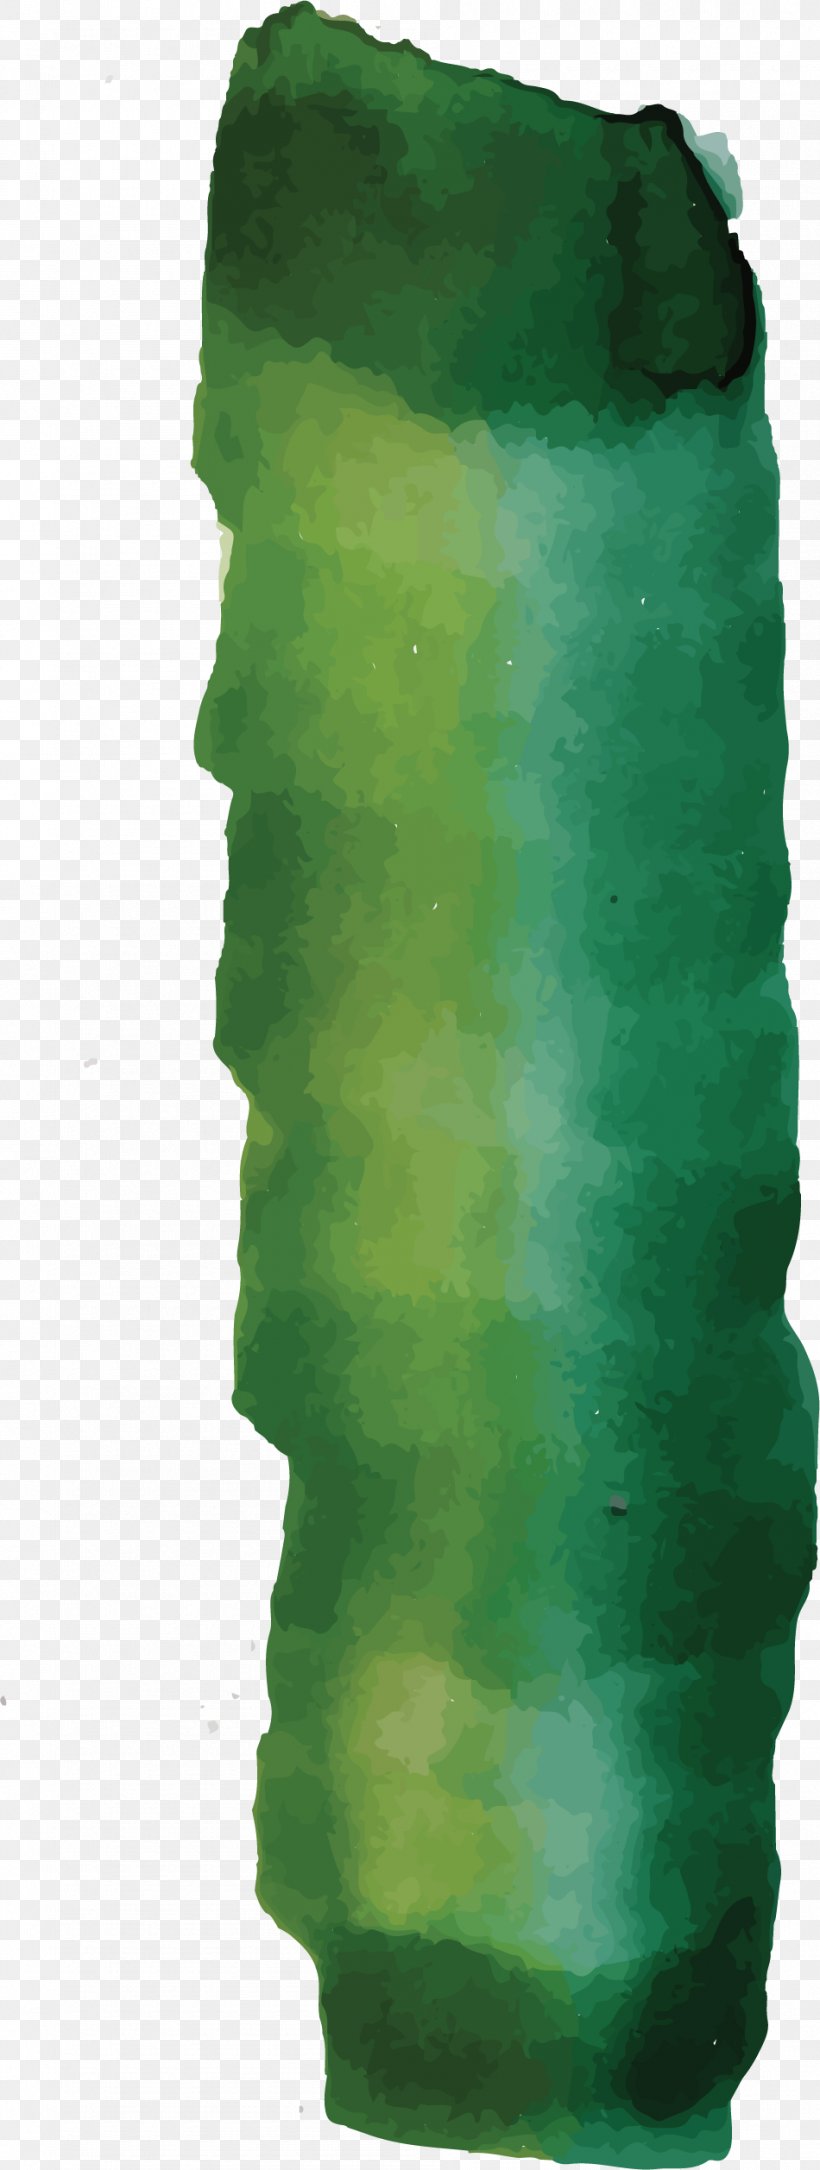 Watercolor Painting Green Ink Brush, PNG, 950x2515px, Watercolor Painting, Google Images, Graffiti, Green, Ink Brush Download Free